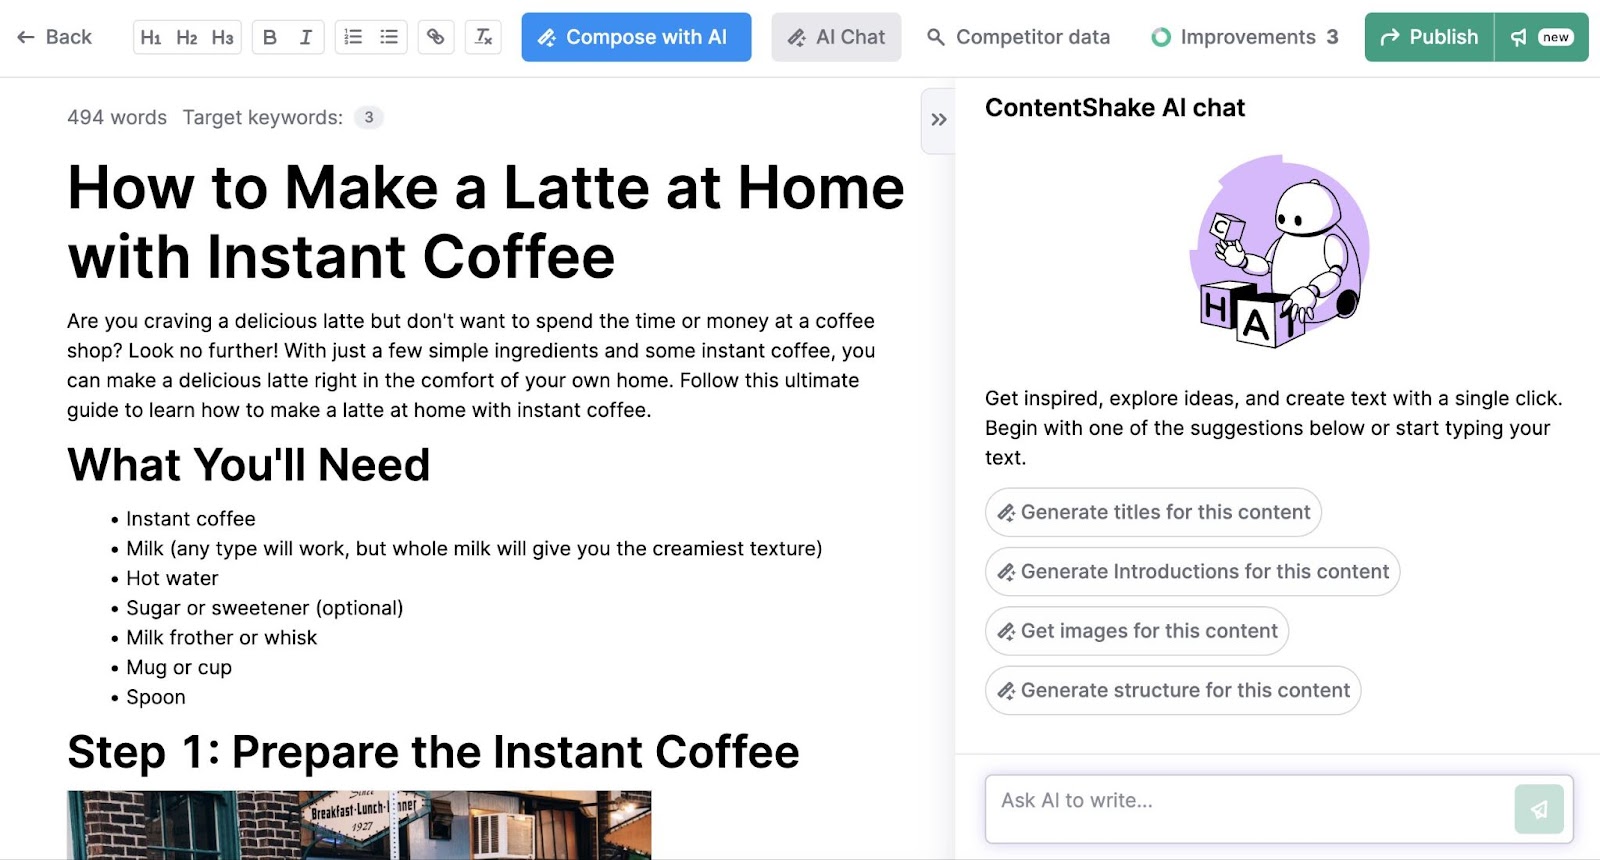 ContentShake AI editor with an article on the left-hand side and an AI chat on the right-hand side of the screen